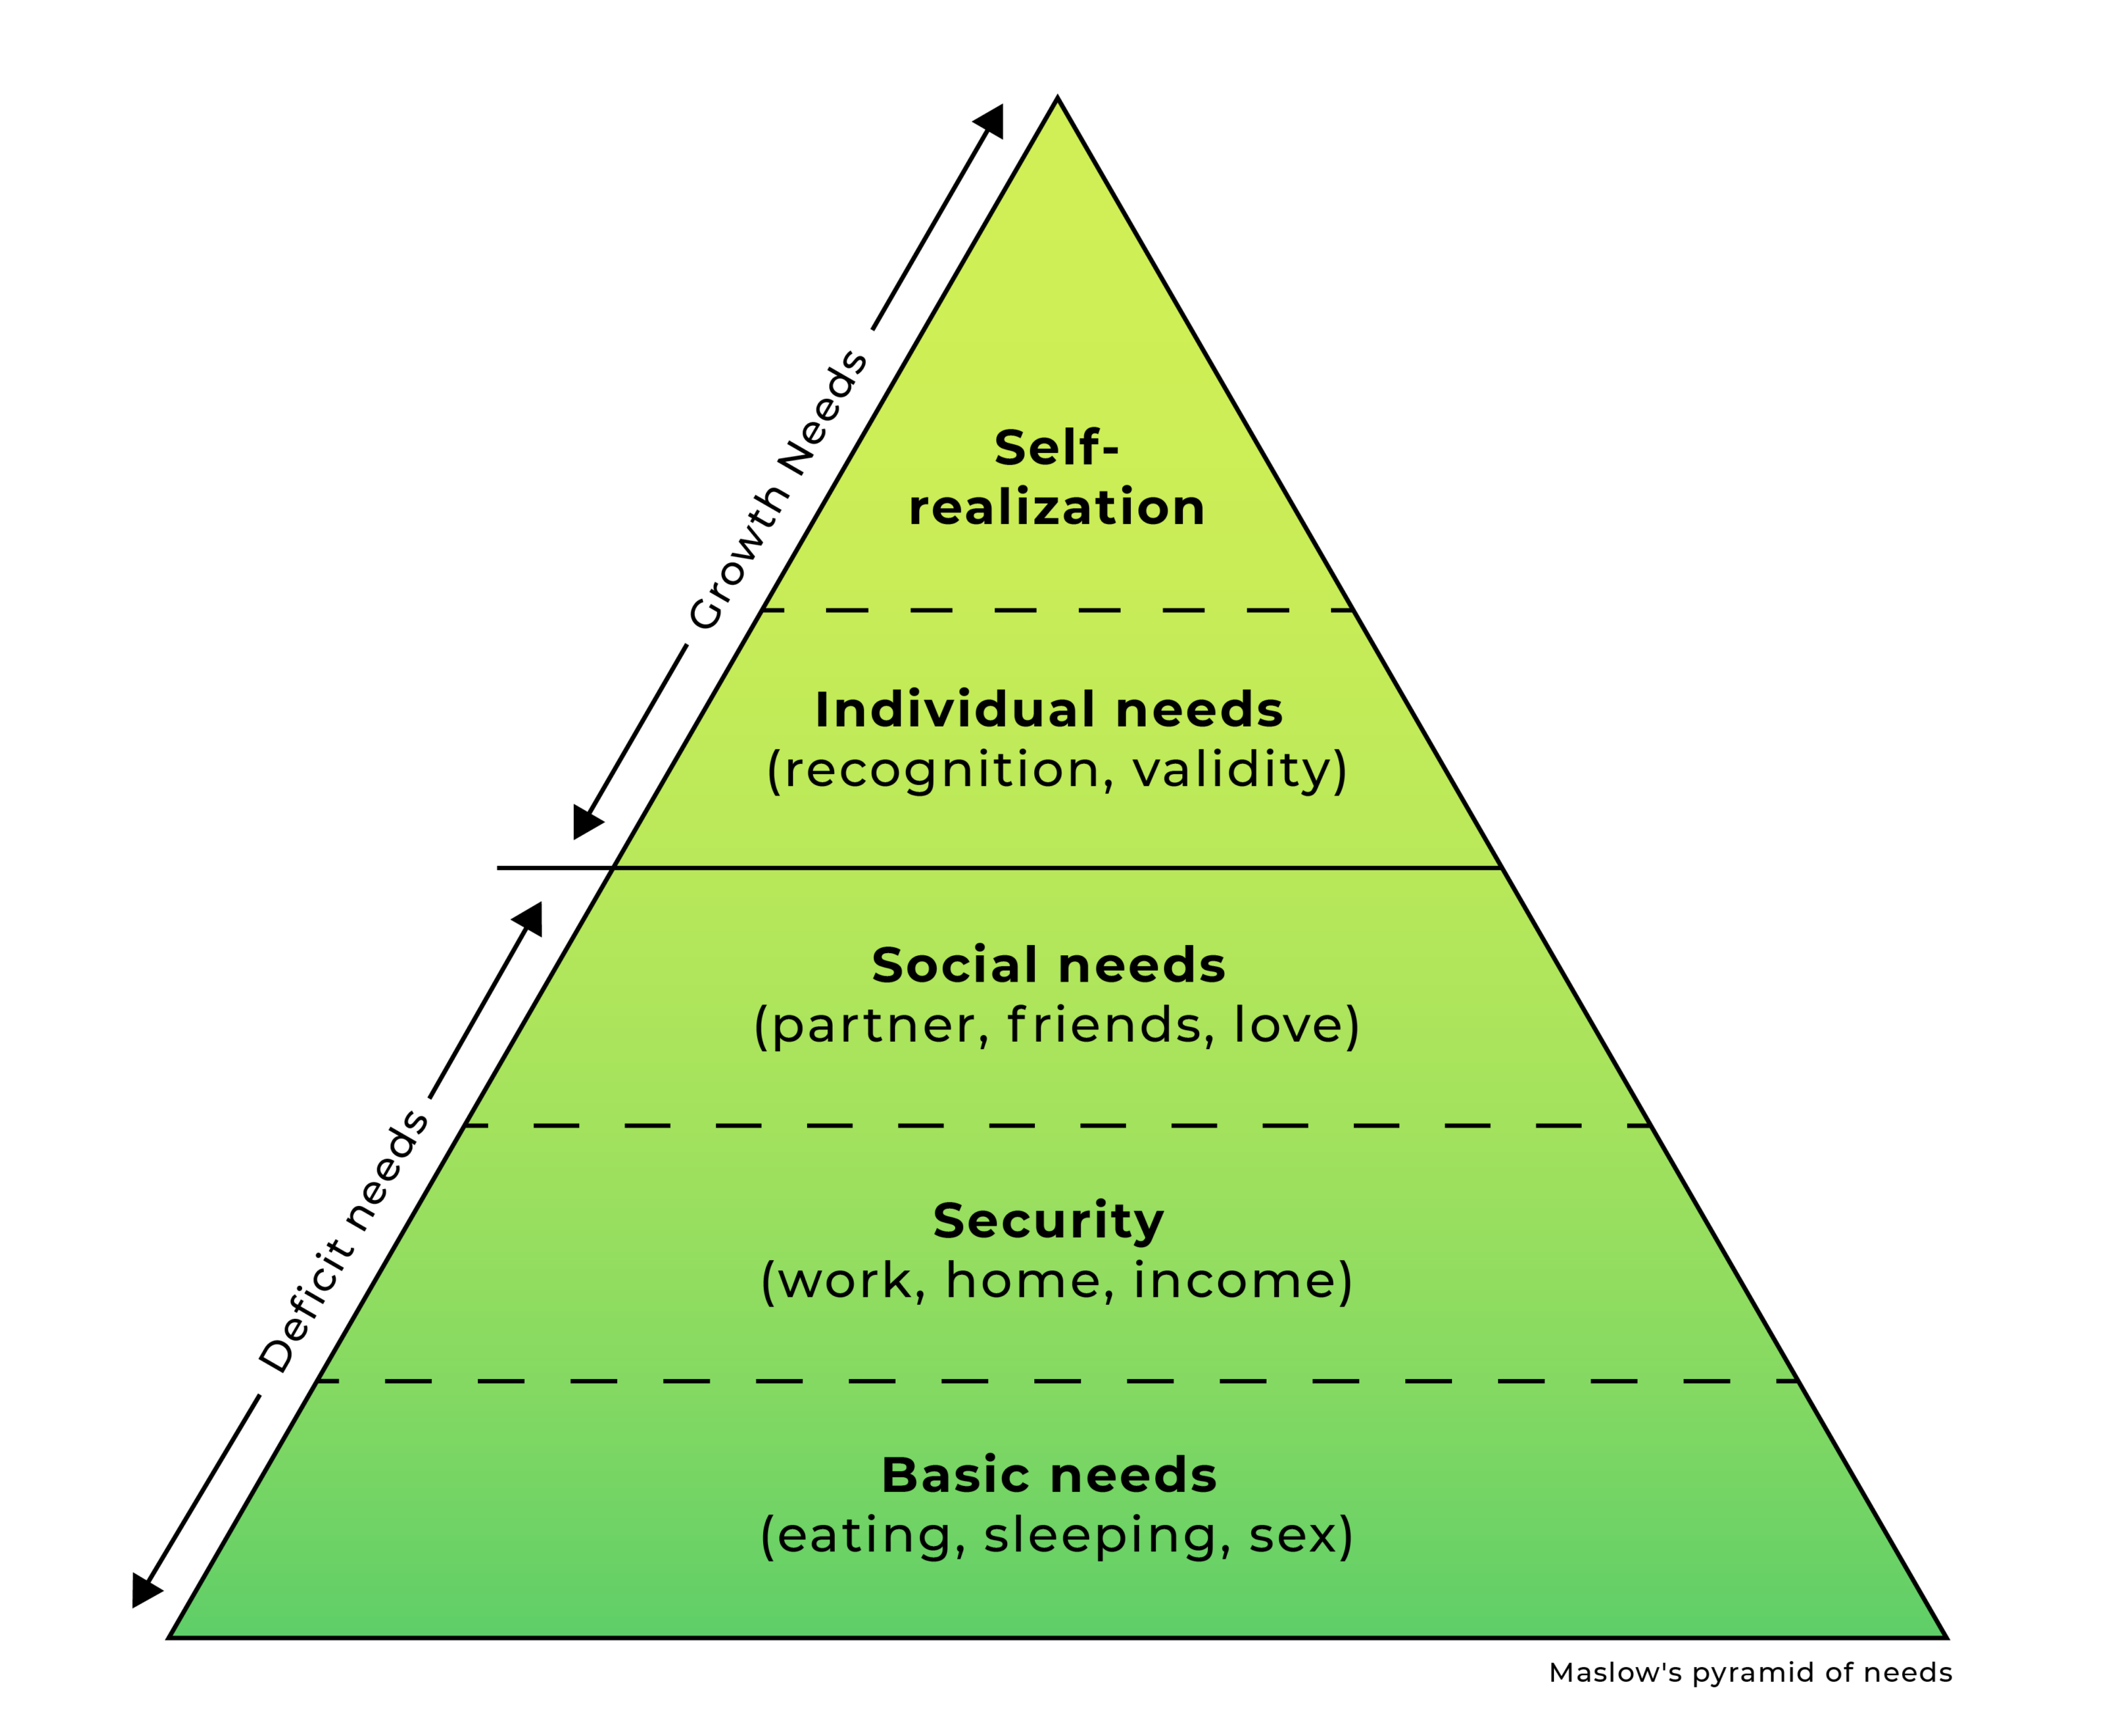 The pyramid of needs according to Maslow